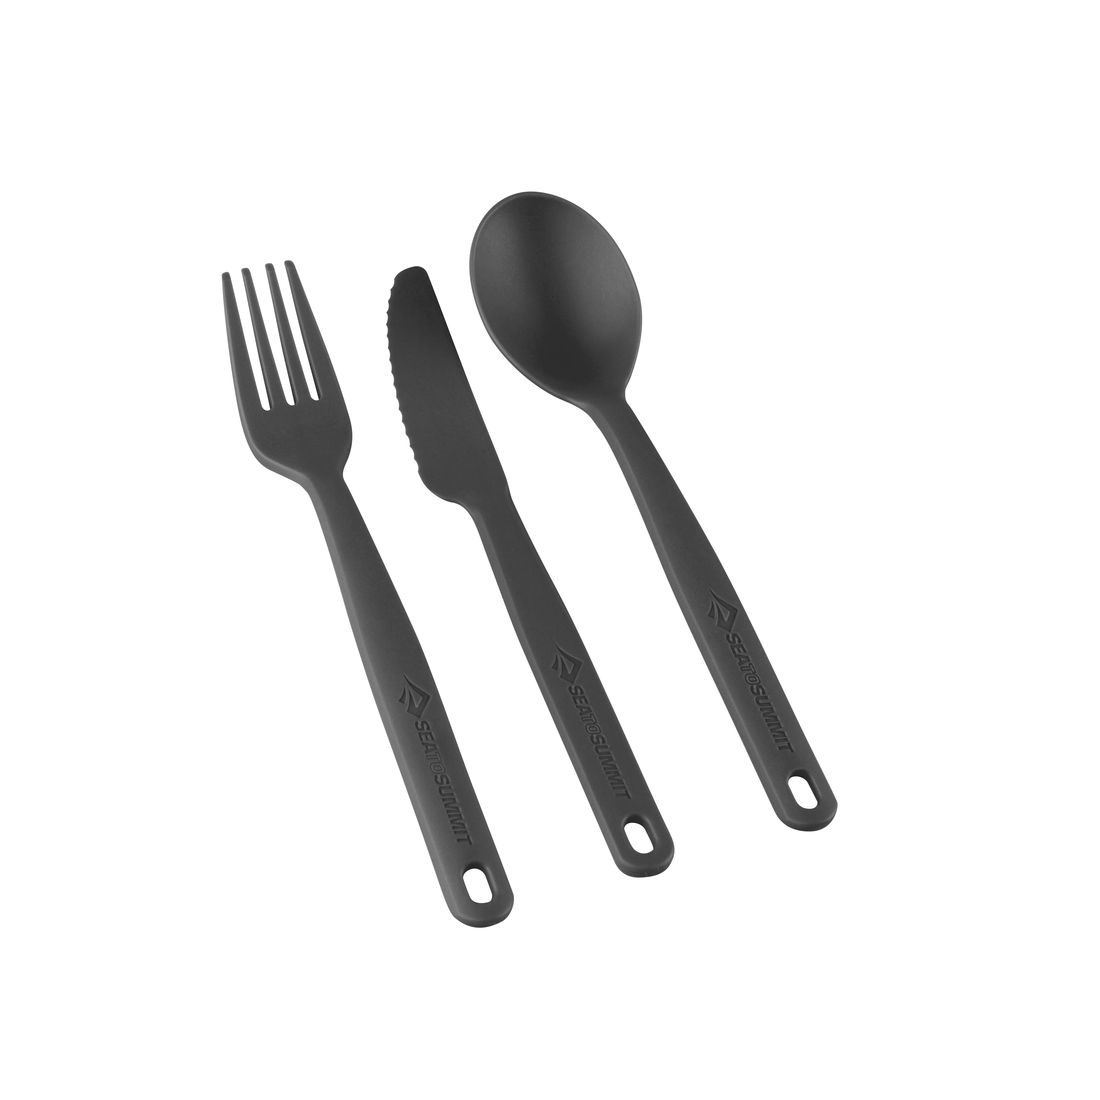 Sea To Summit Camp Cutlery Charcoal (Set of 3)